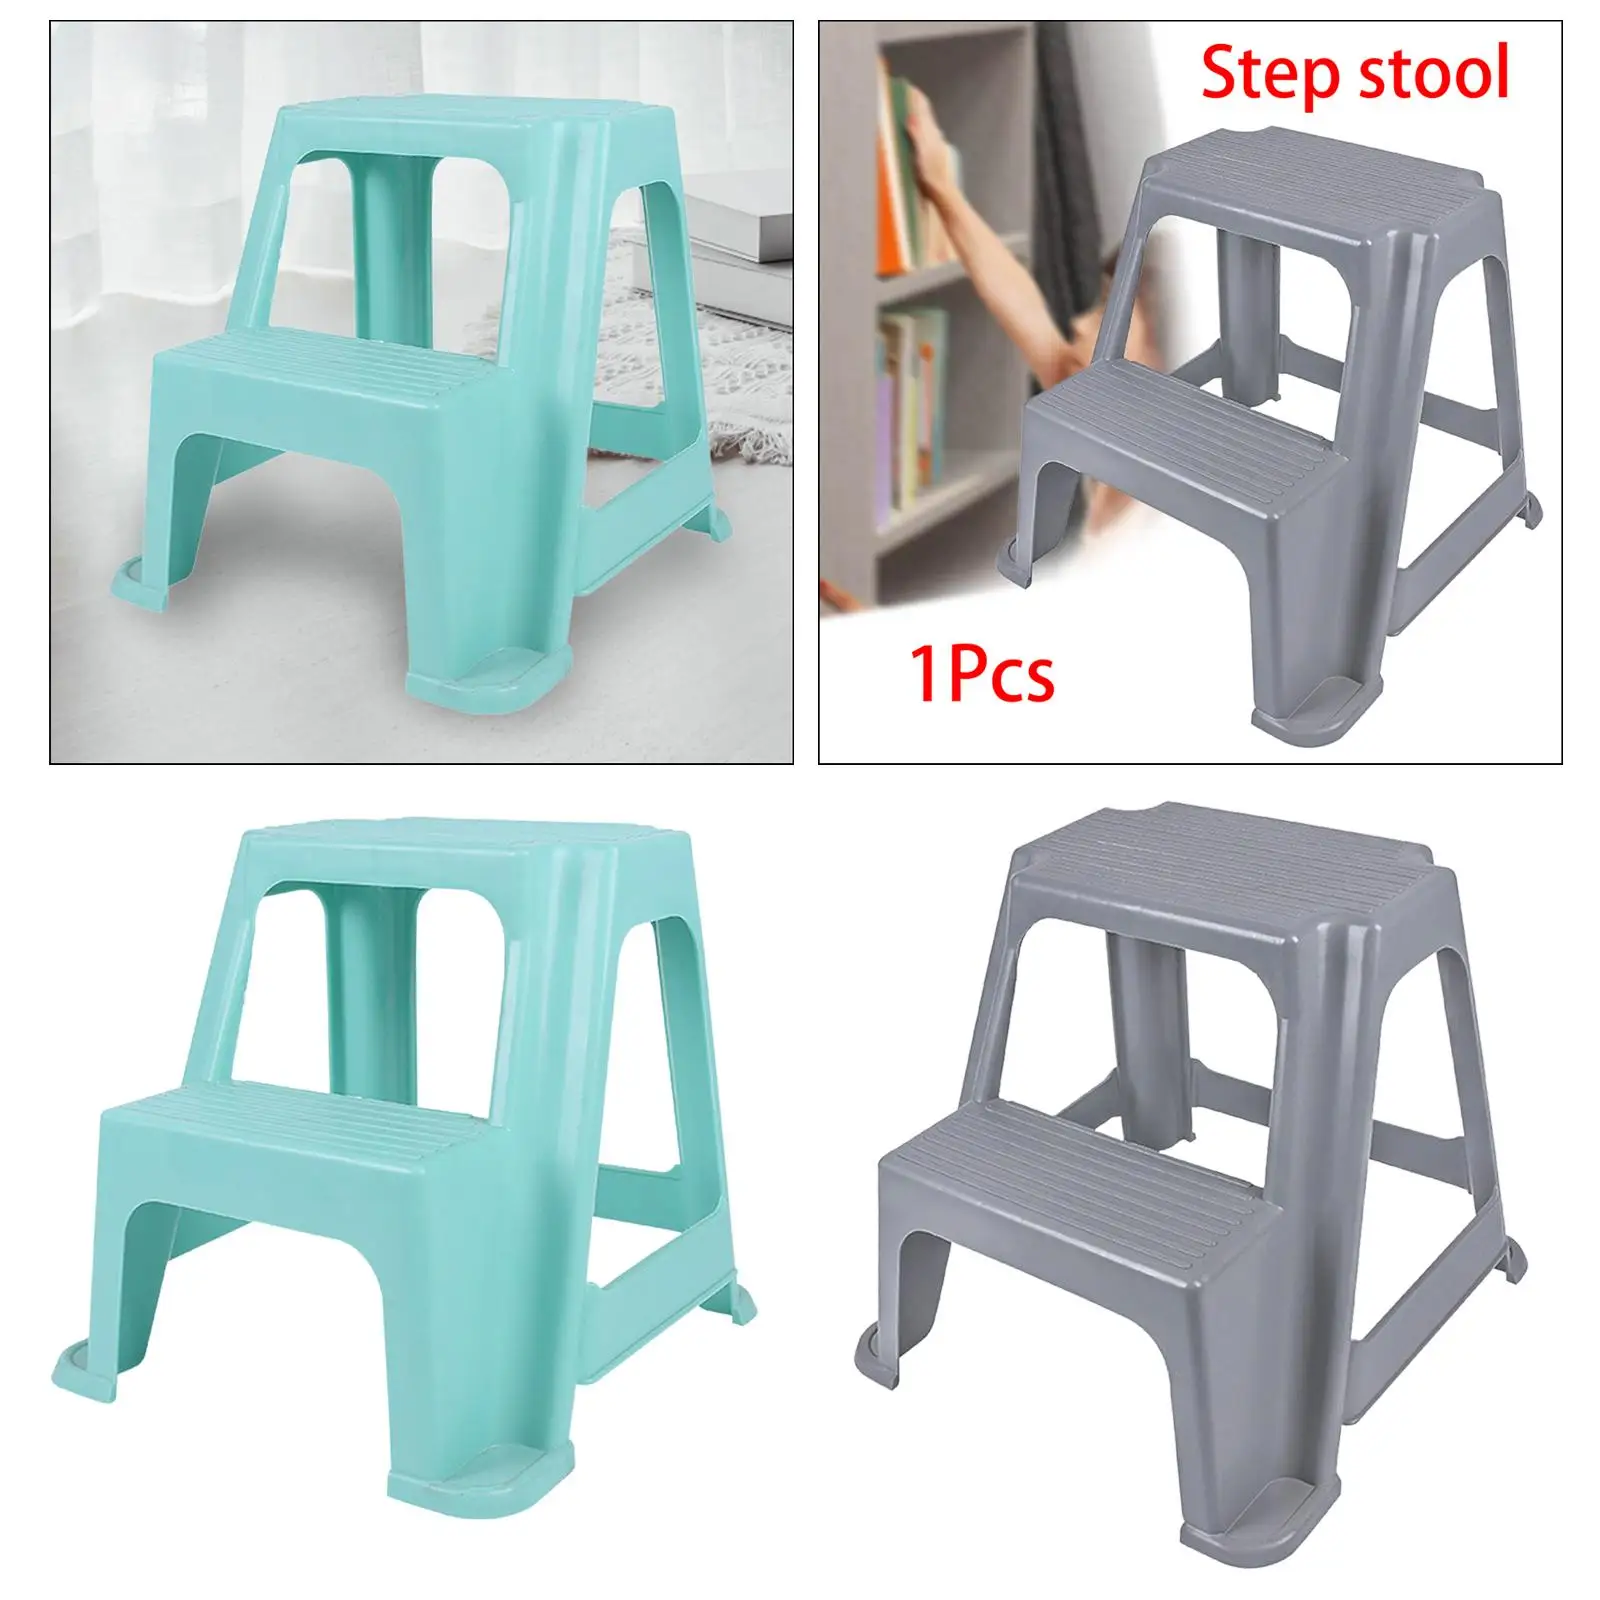 2 Step Stool Portable Footstool Bedside Step Stool Stepping Stool Two Step Stool for Kids Adults Pets Elderly Potty Training